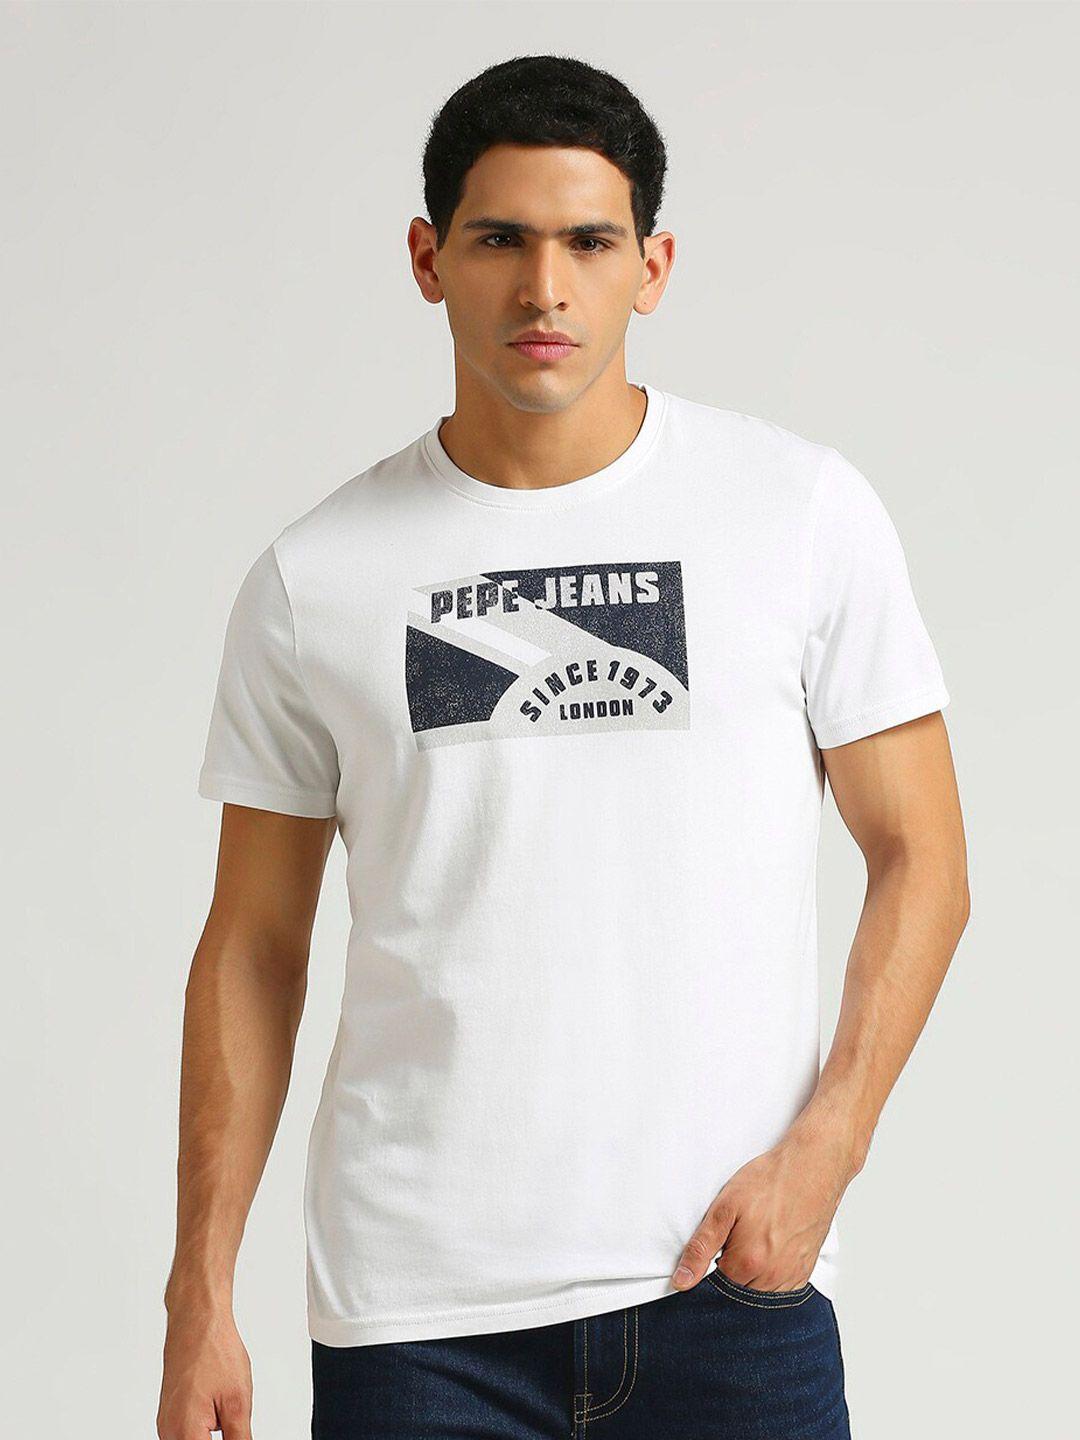 pepe jeans typography printed pure cotton applique slim fit t-shirt